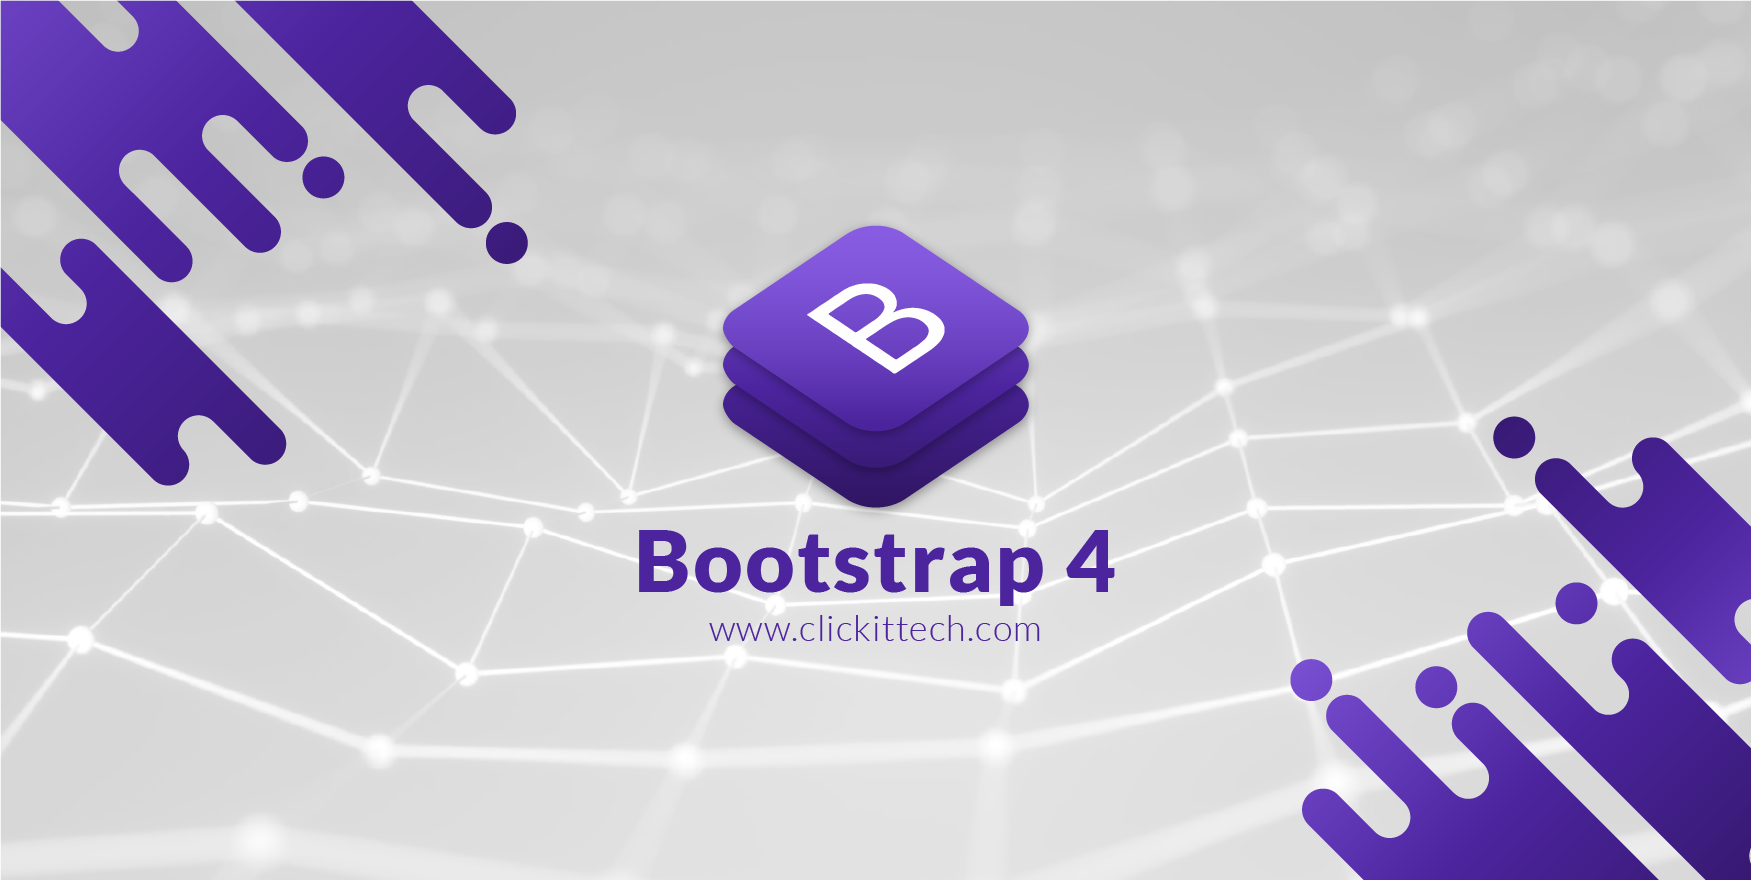 [Bootstrap] Hide and show elements by bootstrap.